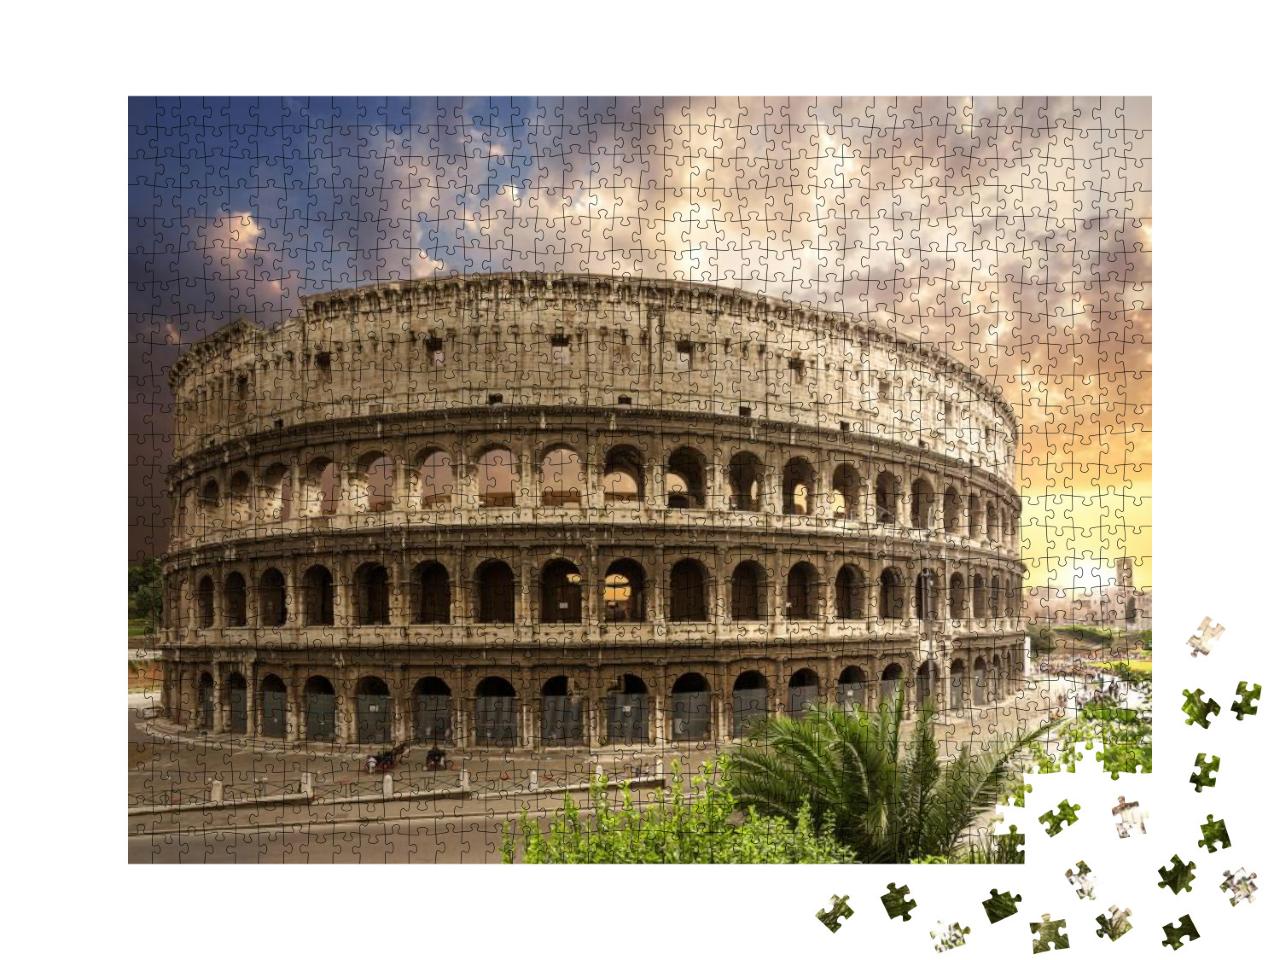 Coliseum. Rome. Italy... Jigsaw Puzzle with 1000 pieces